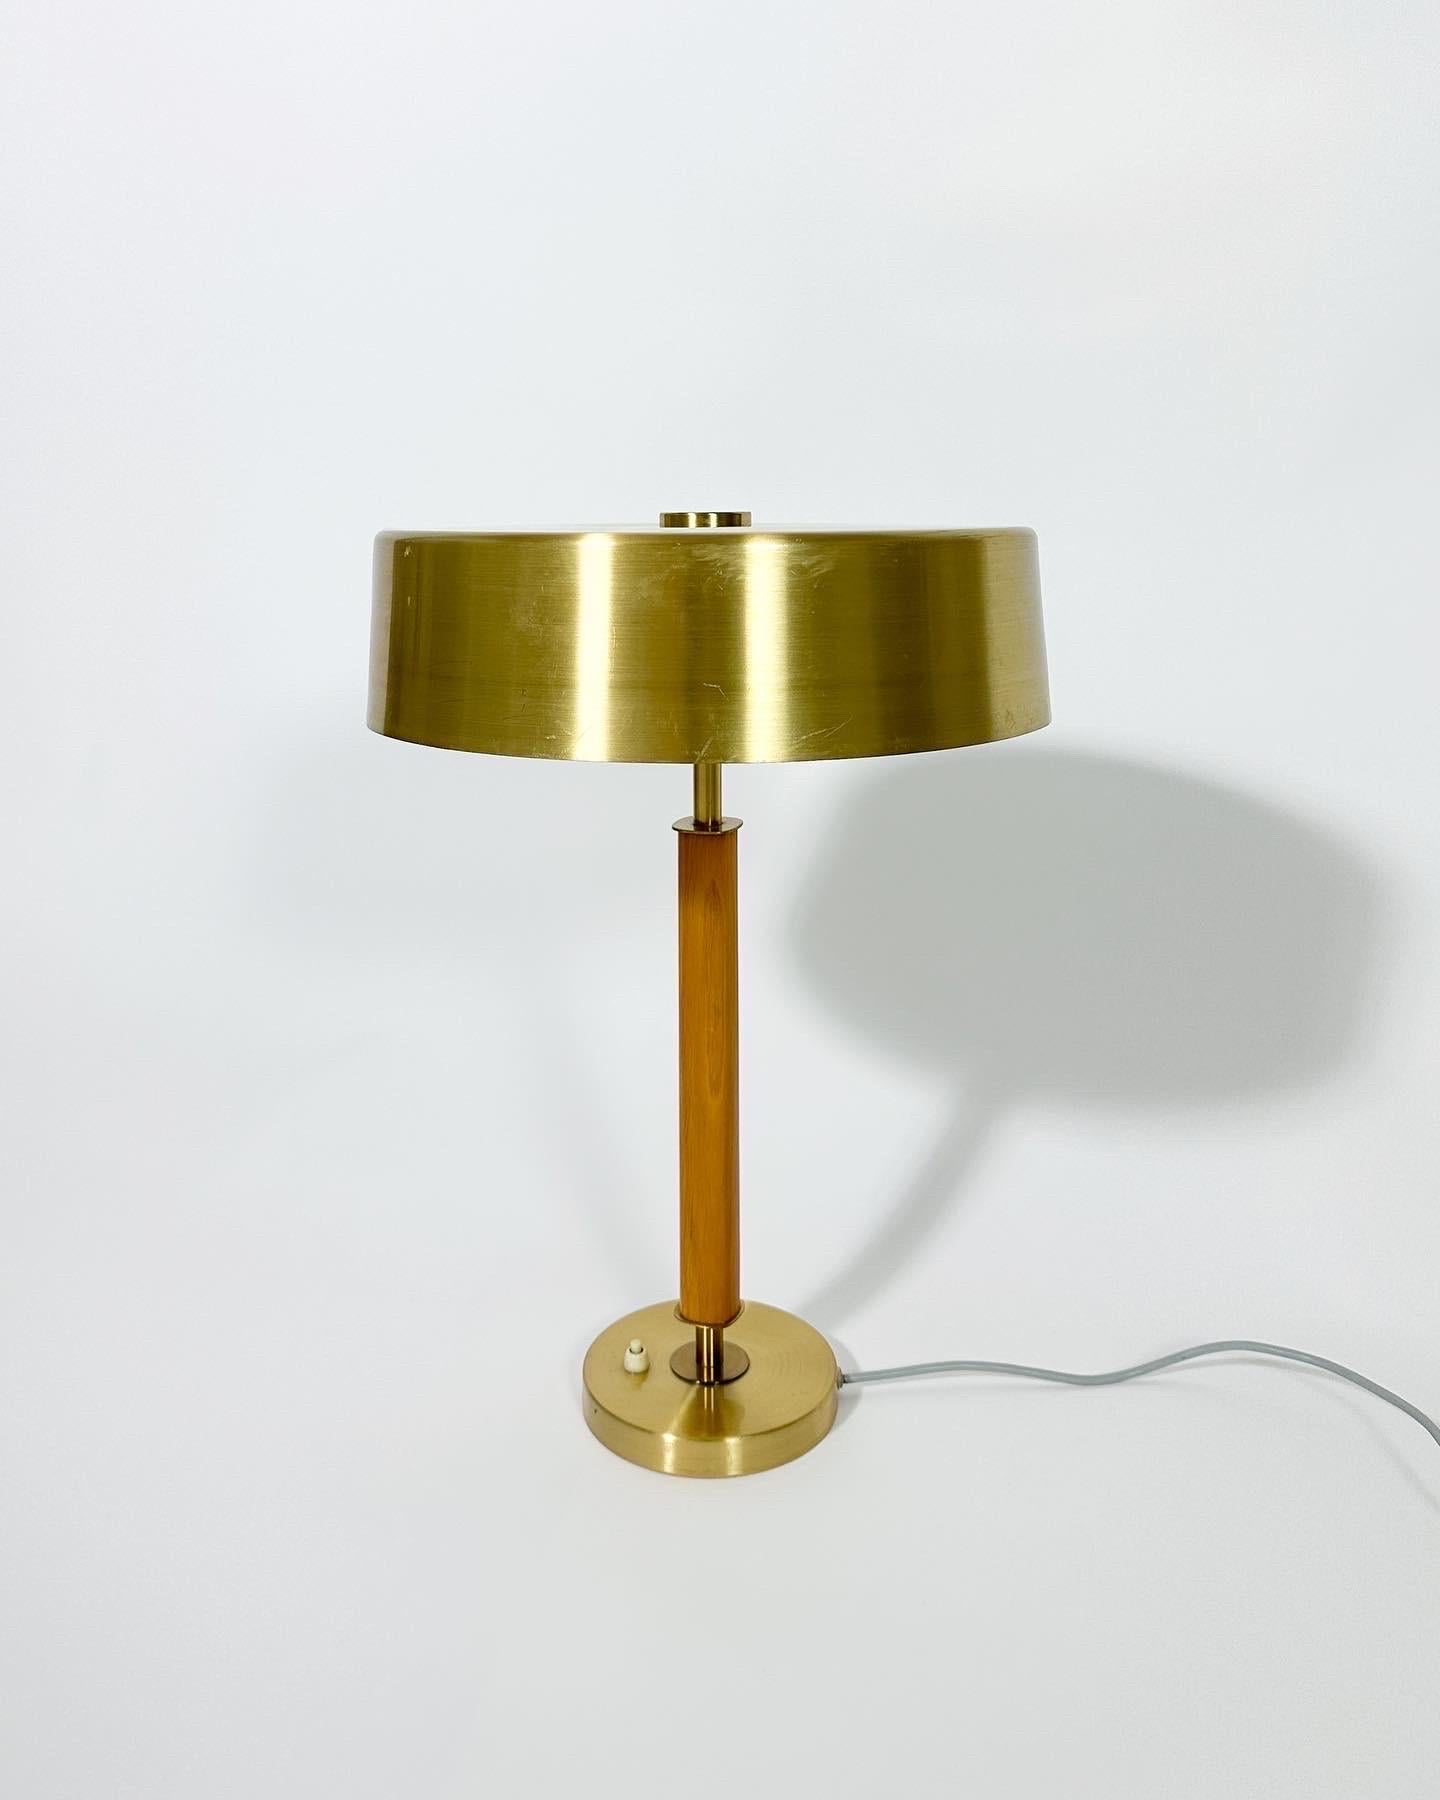 Elegant, clean lined table lamp by the Swedish lighting company Boréns in Borås in the 1960s.

Model No. B8449 with a brushed brass shade and a contrasting wooden stem. Beautiful brass ‚button‘ on top of the shade.

Good original condition with